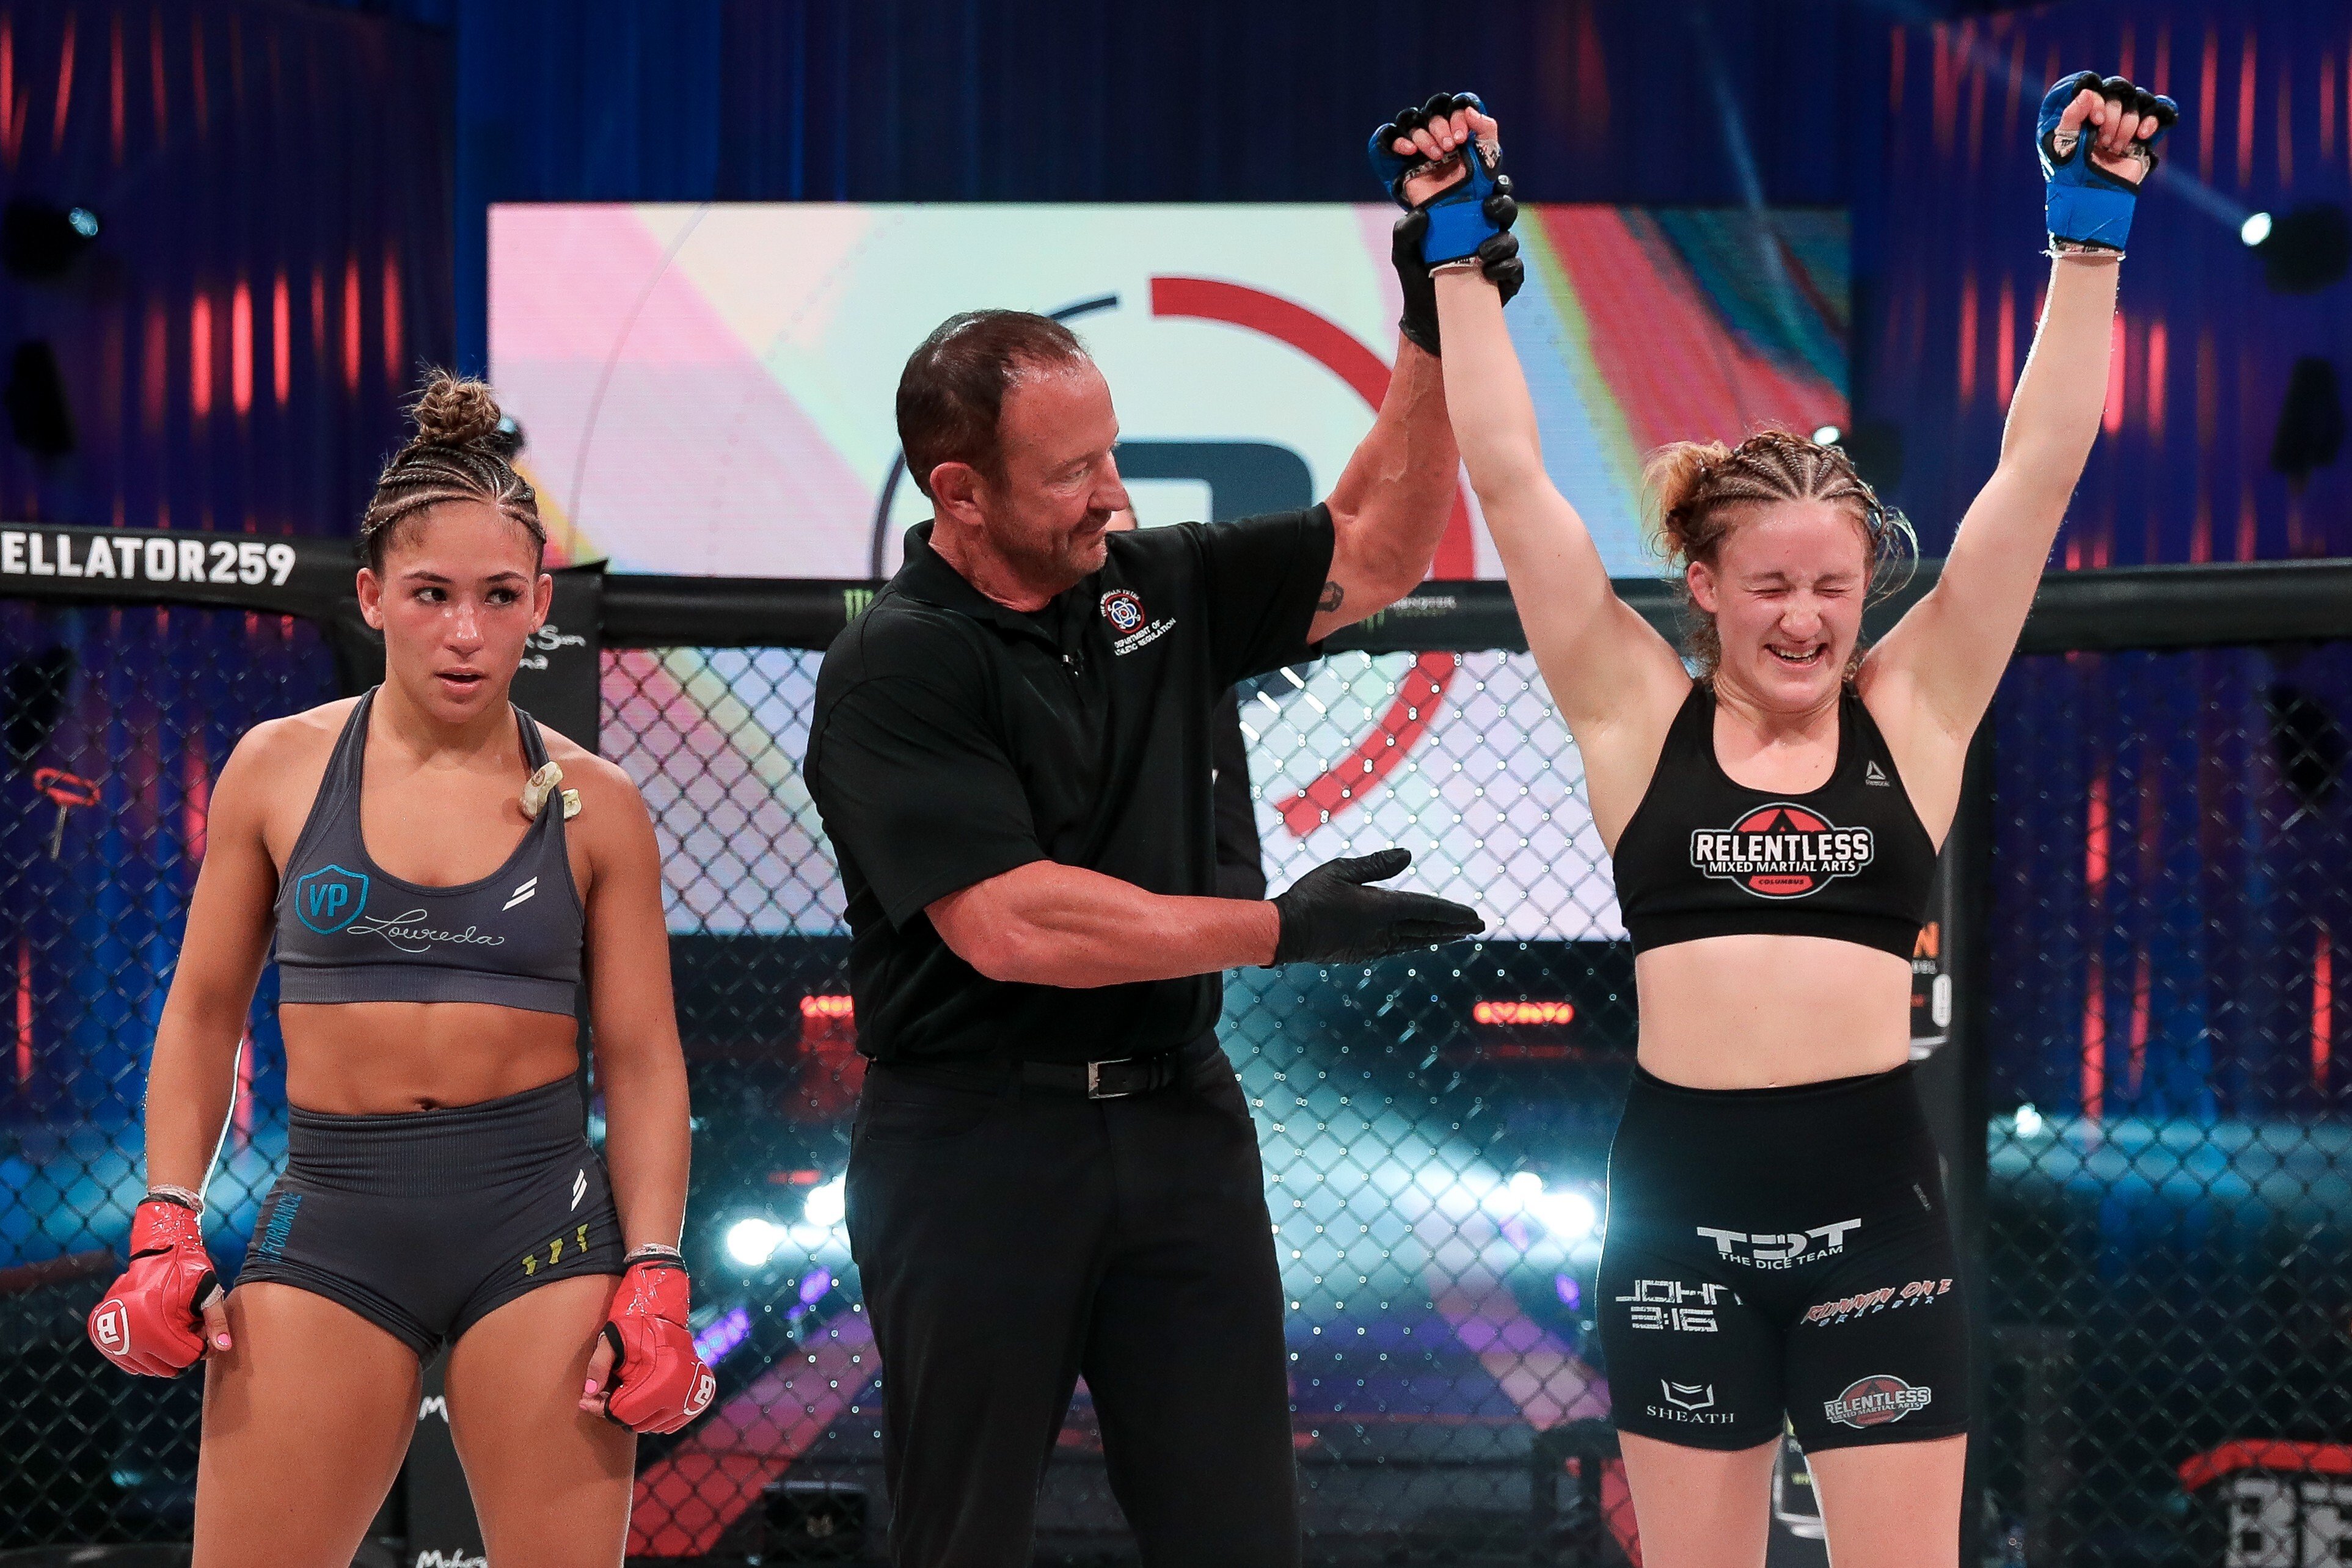 Hannah Guy’s arm is raised after earning a unanimous decision against Valerie Loureda at Bellator 259. Photos: Bellator MMA